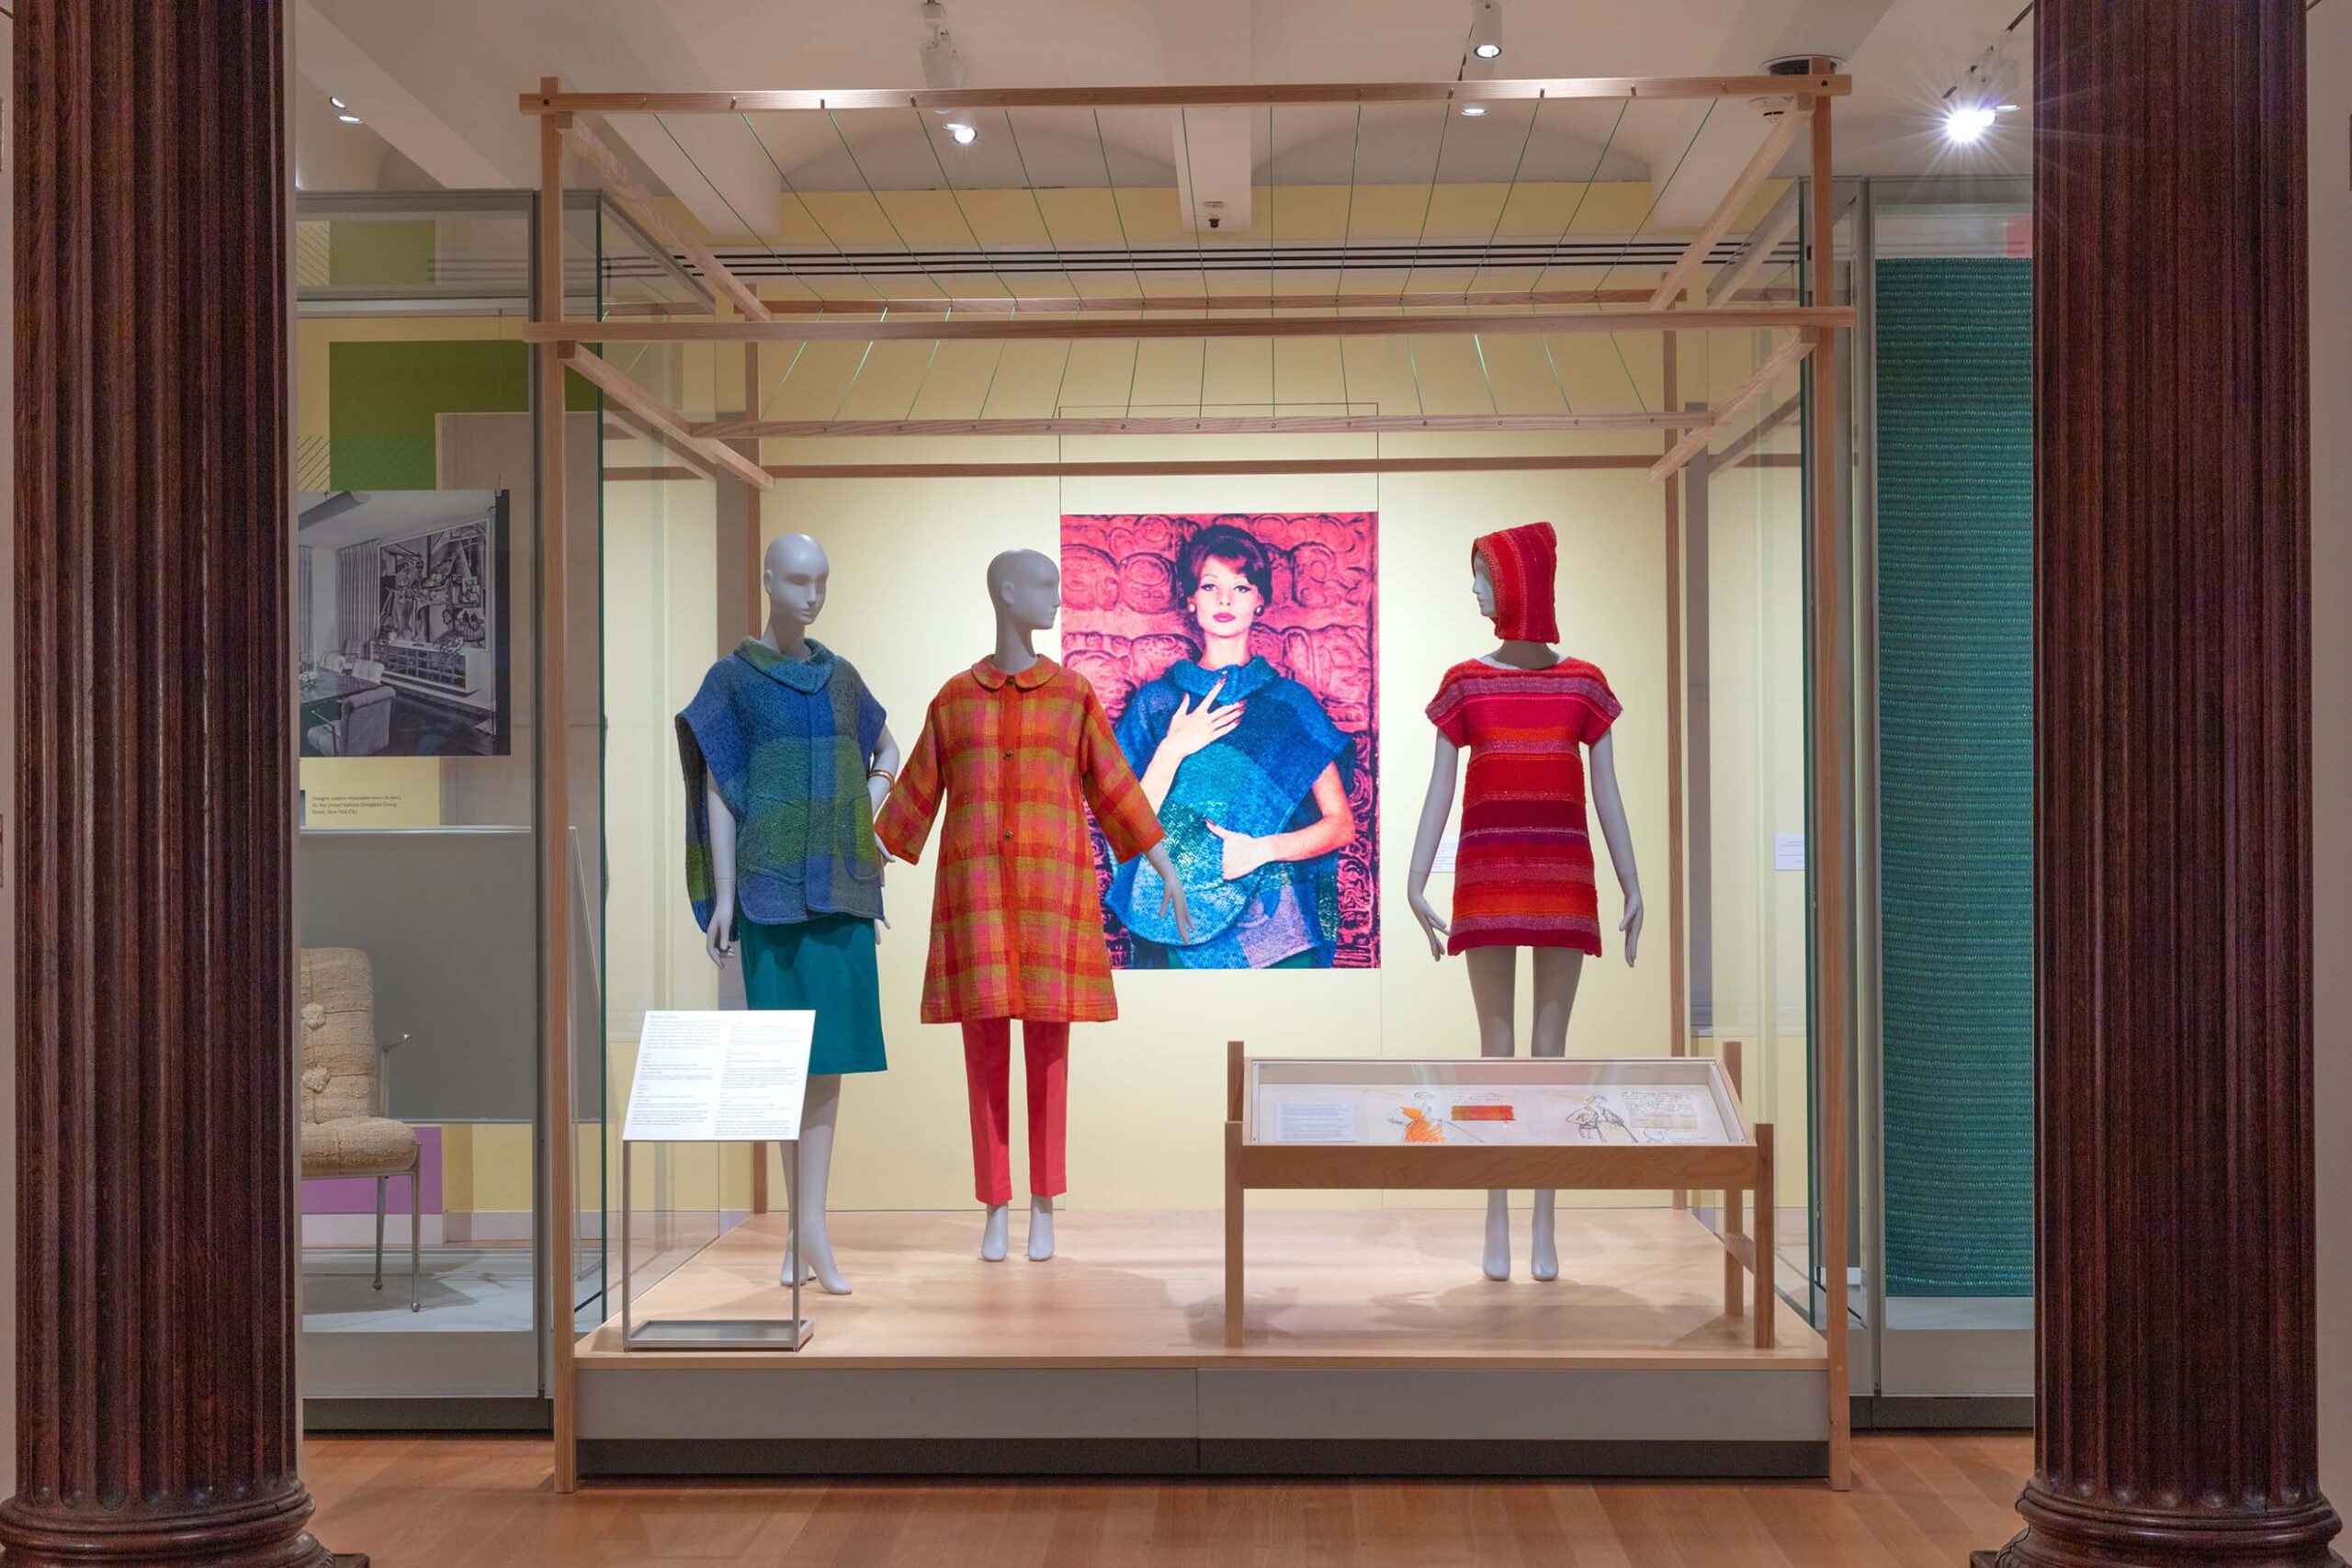 Three mannequins dressed in brightly covered textiles on view in front of a large photograph showing a woman dressed in similar textiles.